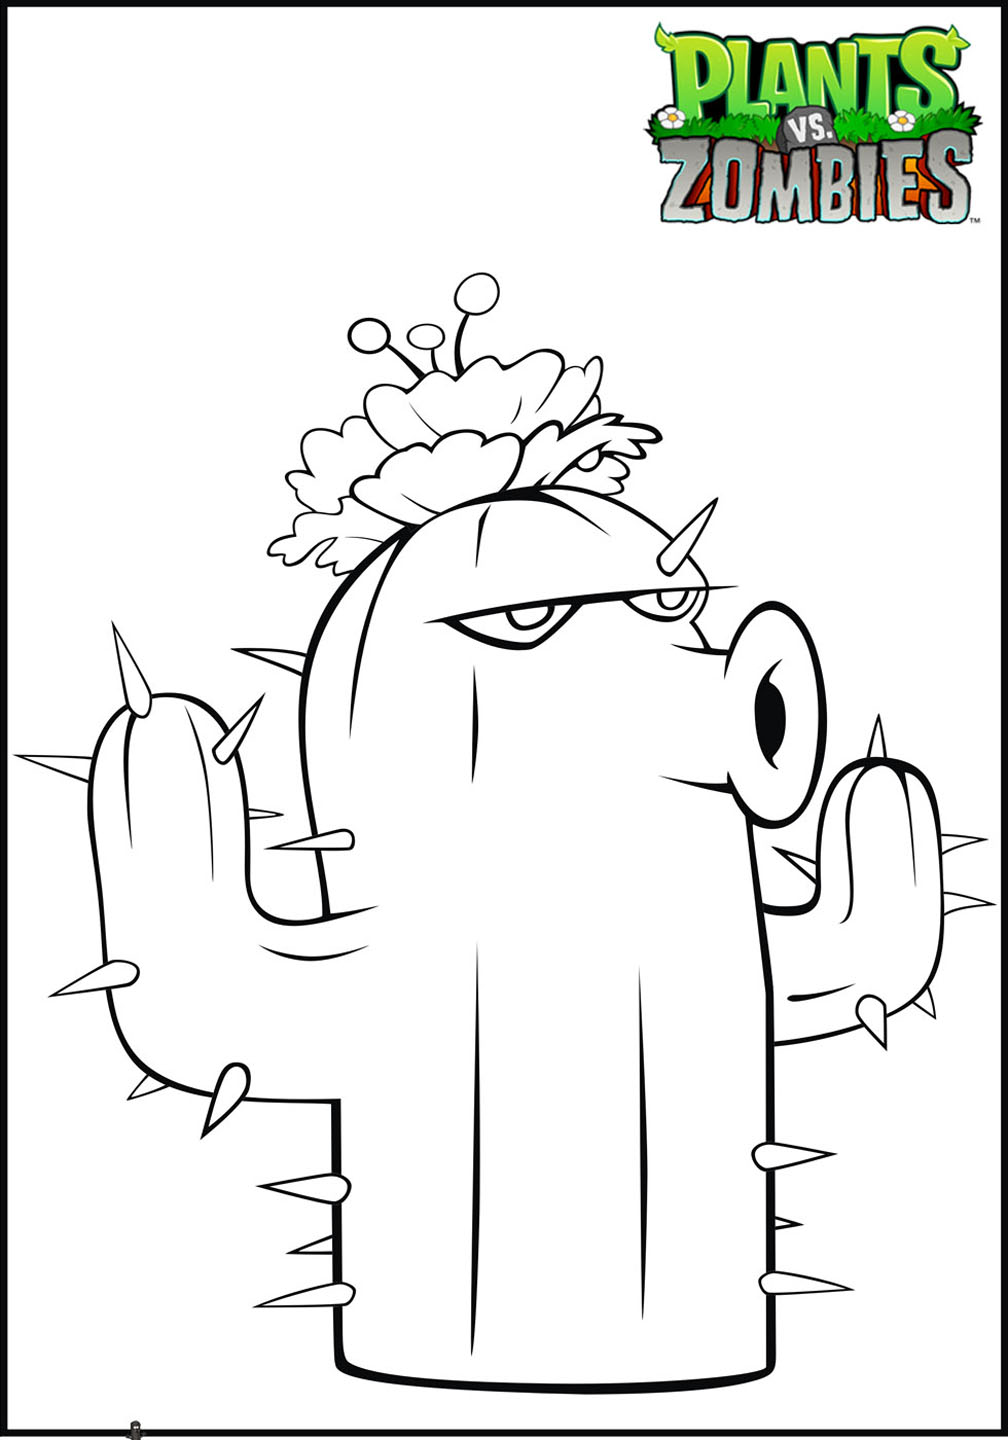 Plants vs Zombie free coloring pages to download - Plants Vs Zombies Kids  Coloring Pages